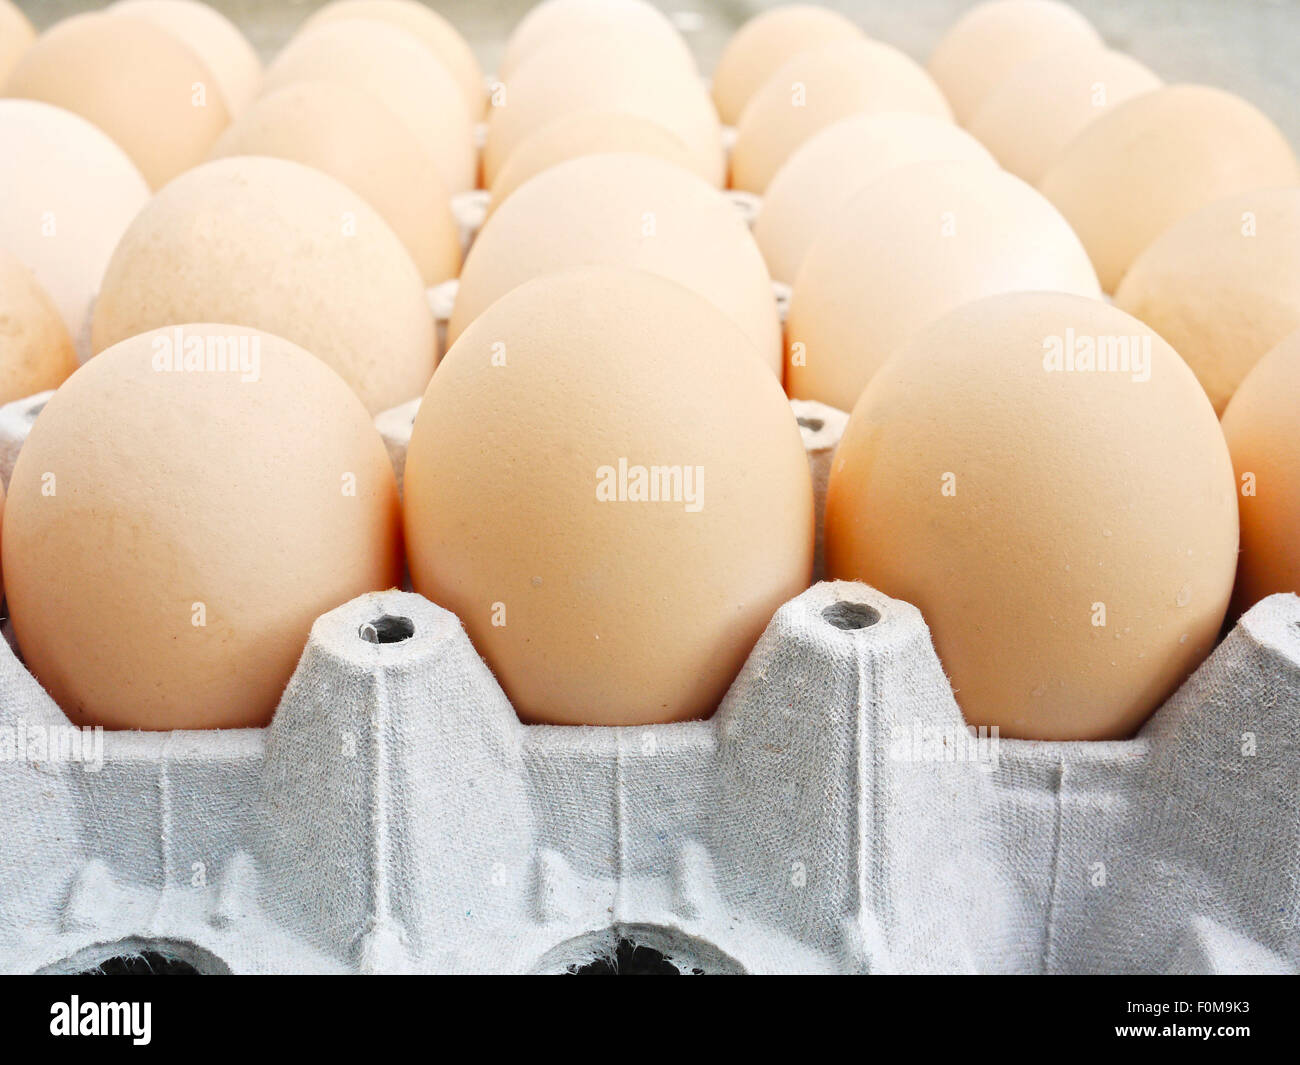 Brown eggs in a flat carton fresh from the farm Stock Photo